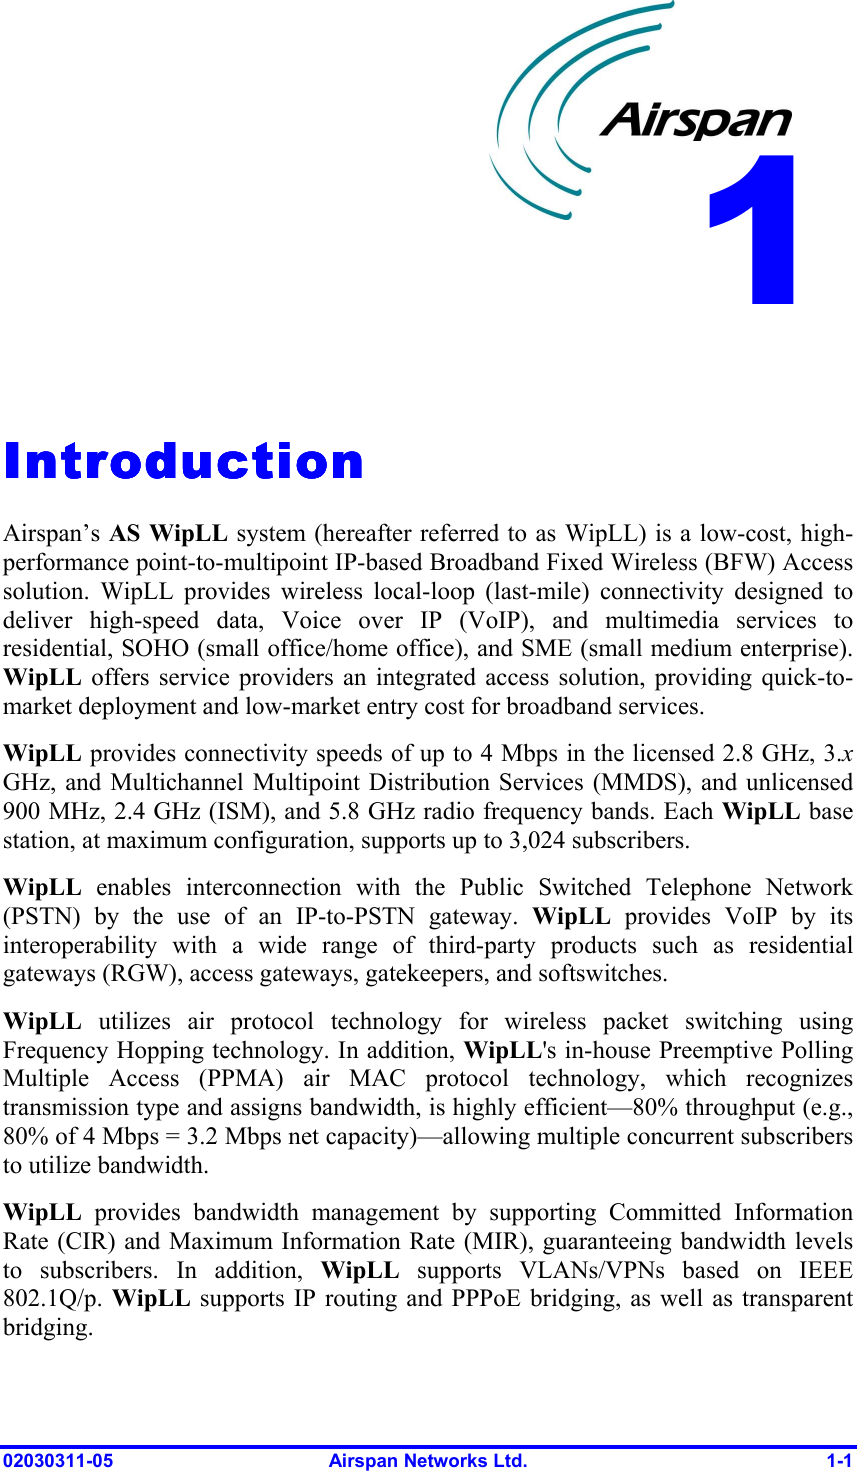  02030311-05  Airspan Networks Ltd.  1-1   IntroductionIntroductionIntroductionIntroduction    Airspan’s AS WipLL system (hereafter referred to as WipLL) is a low-cost, high-performance point-to-multipoint IP-based Broadband Fixed Wireless (BFW) Access solution. WipLL provides wireless local-loop (last-mile) connectivity designed to deliver high-speed data, Voice over IP (VoIP), and multimedia services to residential, SOHO (small office/home office), and SME (small medium enterprise). WipLL offers service providers an integrated access solution, providing quick-to-market deployment and low-market entry cost for broadband services. WipLL provides connectivity speeds of up to 4 Mbps in the licensed 2.8 GHz, 3.x GHz, and Multichannel Multipoint Distribution Services (MMDS), and unlicensed 900 MHz, 2.4 GHz (ISM), and 5.8 GHz radio frequency bands. Each WipLL base station, at maximum configuration, supports up to 3,024 subscribers. WipLL enables interconnection with the Public Switched Telephone Network (PSTN) by the use of an IP-to-PSTN gateway. WipLL provides VoIP by its interoperability with a wide range of third-party products such as residential gateways (RGW), access gateways, gatekeepers, and softswitches. WipLL  utilizes air protocol technology for wireless packet switching using Frequency Hopping technology. In addition, WipLL&apos;s in-house Preemptive Polling Multiple Access (PPMA) air MAC protocol technology, which recognizes transmission type and assigns bandwidth, is highly efficient—80% throughput (e.g., 80% of 4 Mbps = 3.2 Mbps net capacity)—allowing multiple concurrent subscribers to utilize bandwidth. WipLL provides bandwidth management by supporting Committed Information Rate (CIR) and Maximum Information Rate (MIR), guaranteeing bandwidth levels to subscribers. In addition, WipLL supports VLANs/VPNs based on IEEE 802.1Q/p. WipLL supports IP routing and PPPoE bridging, as well as transparent bridging.  1 